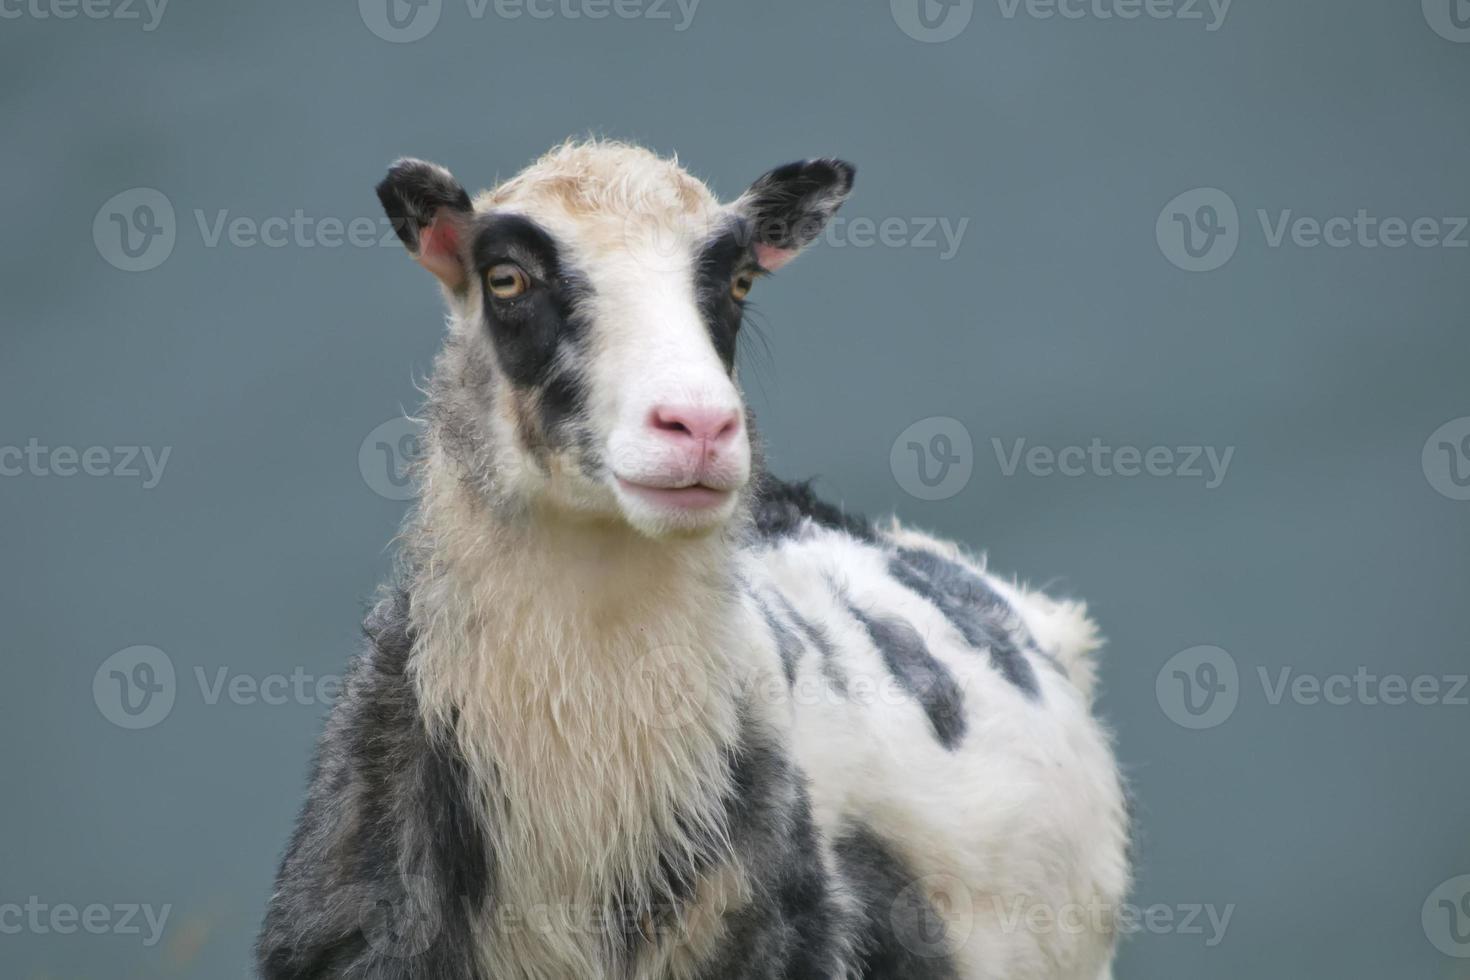 A black and white sheep looking at you close up portrait in the blue sea background photo